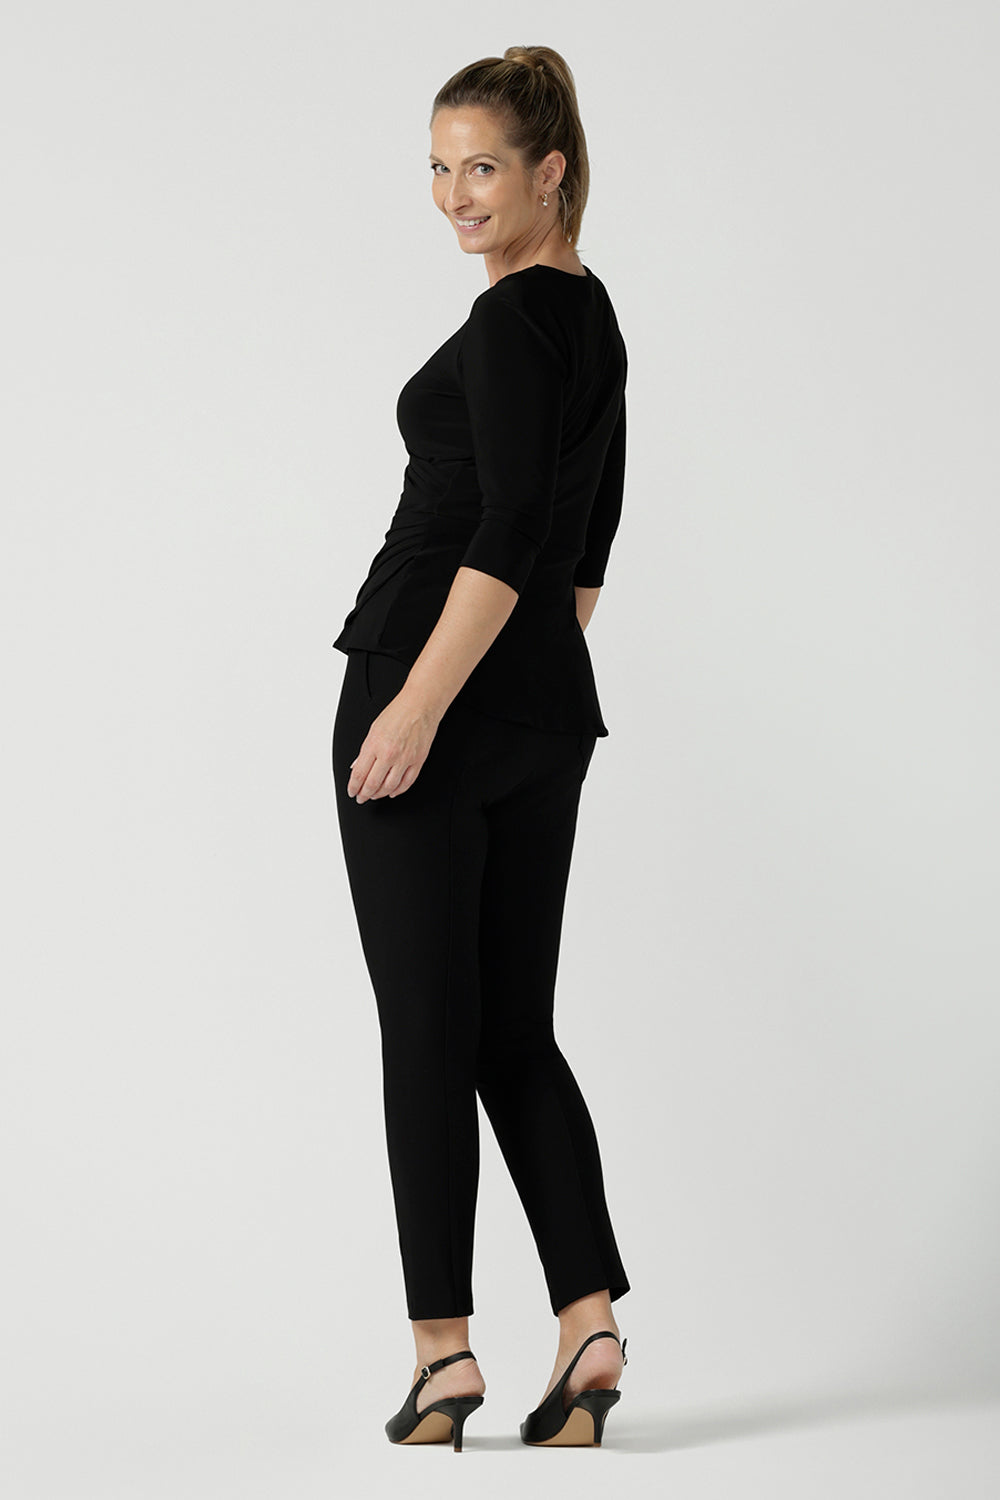 Back view of a size 10 woman wears the Kyle top in Black soft jersey. A soft wrap top made in Australia for women size 8 - 24. The perfect work to weekend top in comfortable and easy care jersey. Made in Australia for women size 8 - 24.